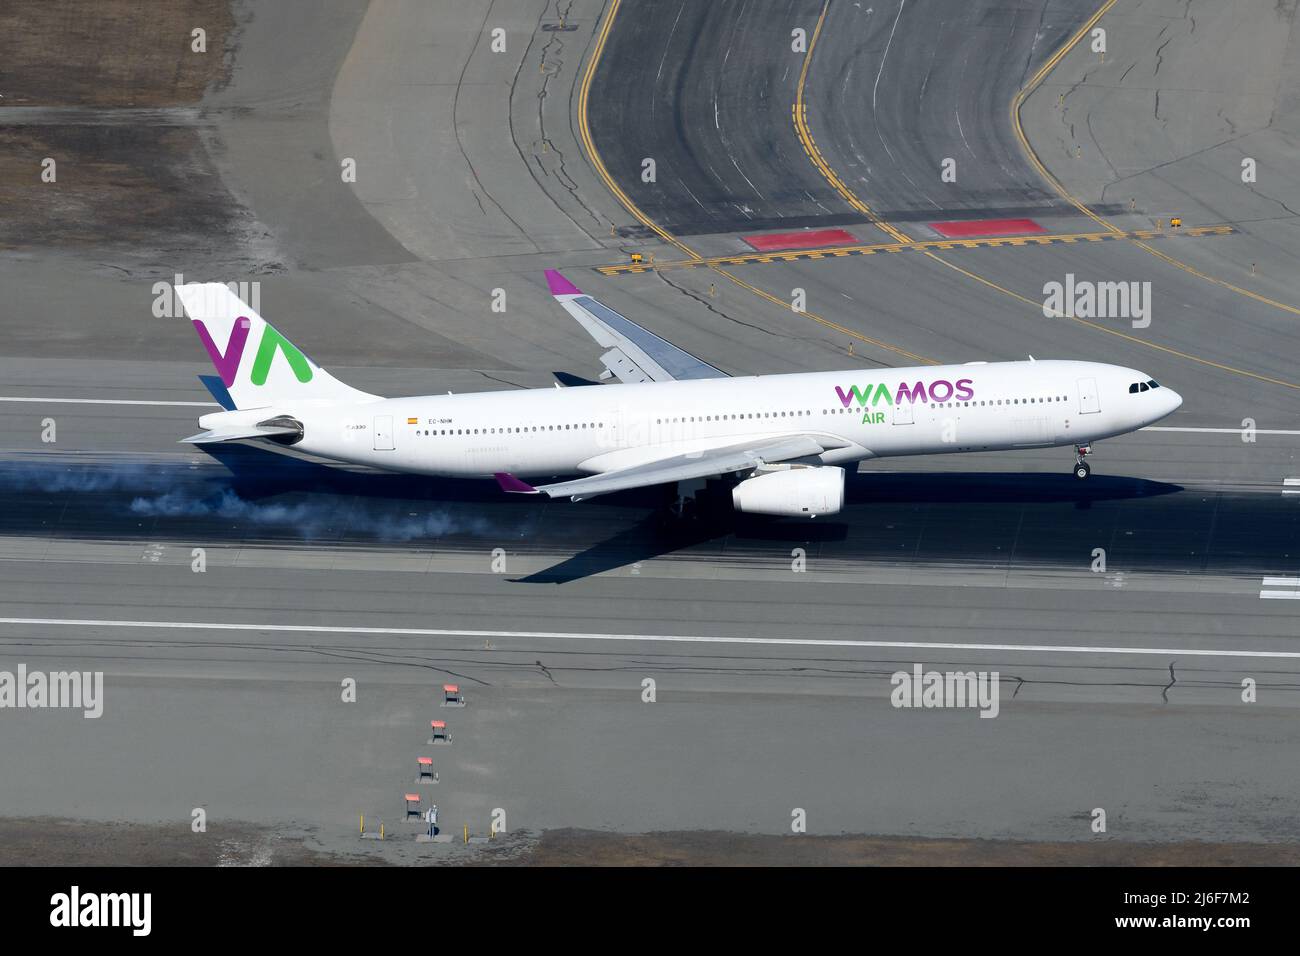 Wamos Air Airbus A330-300 airplane landing. A330 plane of charter airline WamosAir. Aircraft registered as EC-NHM. Stock Photo